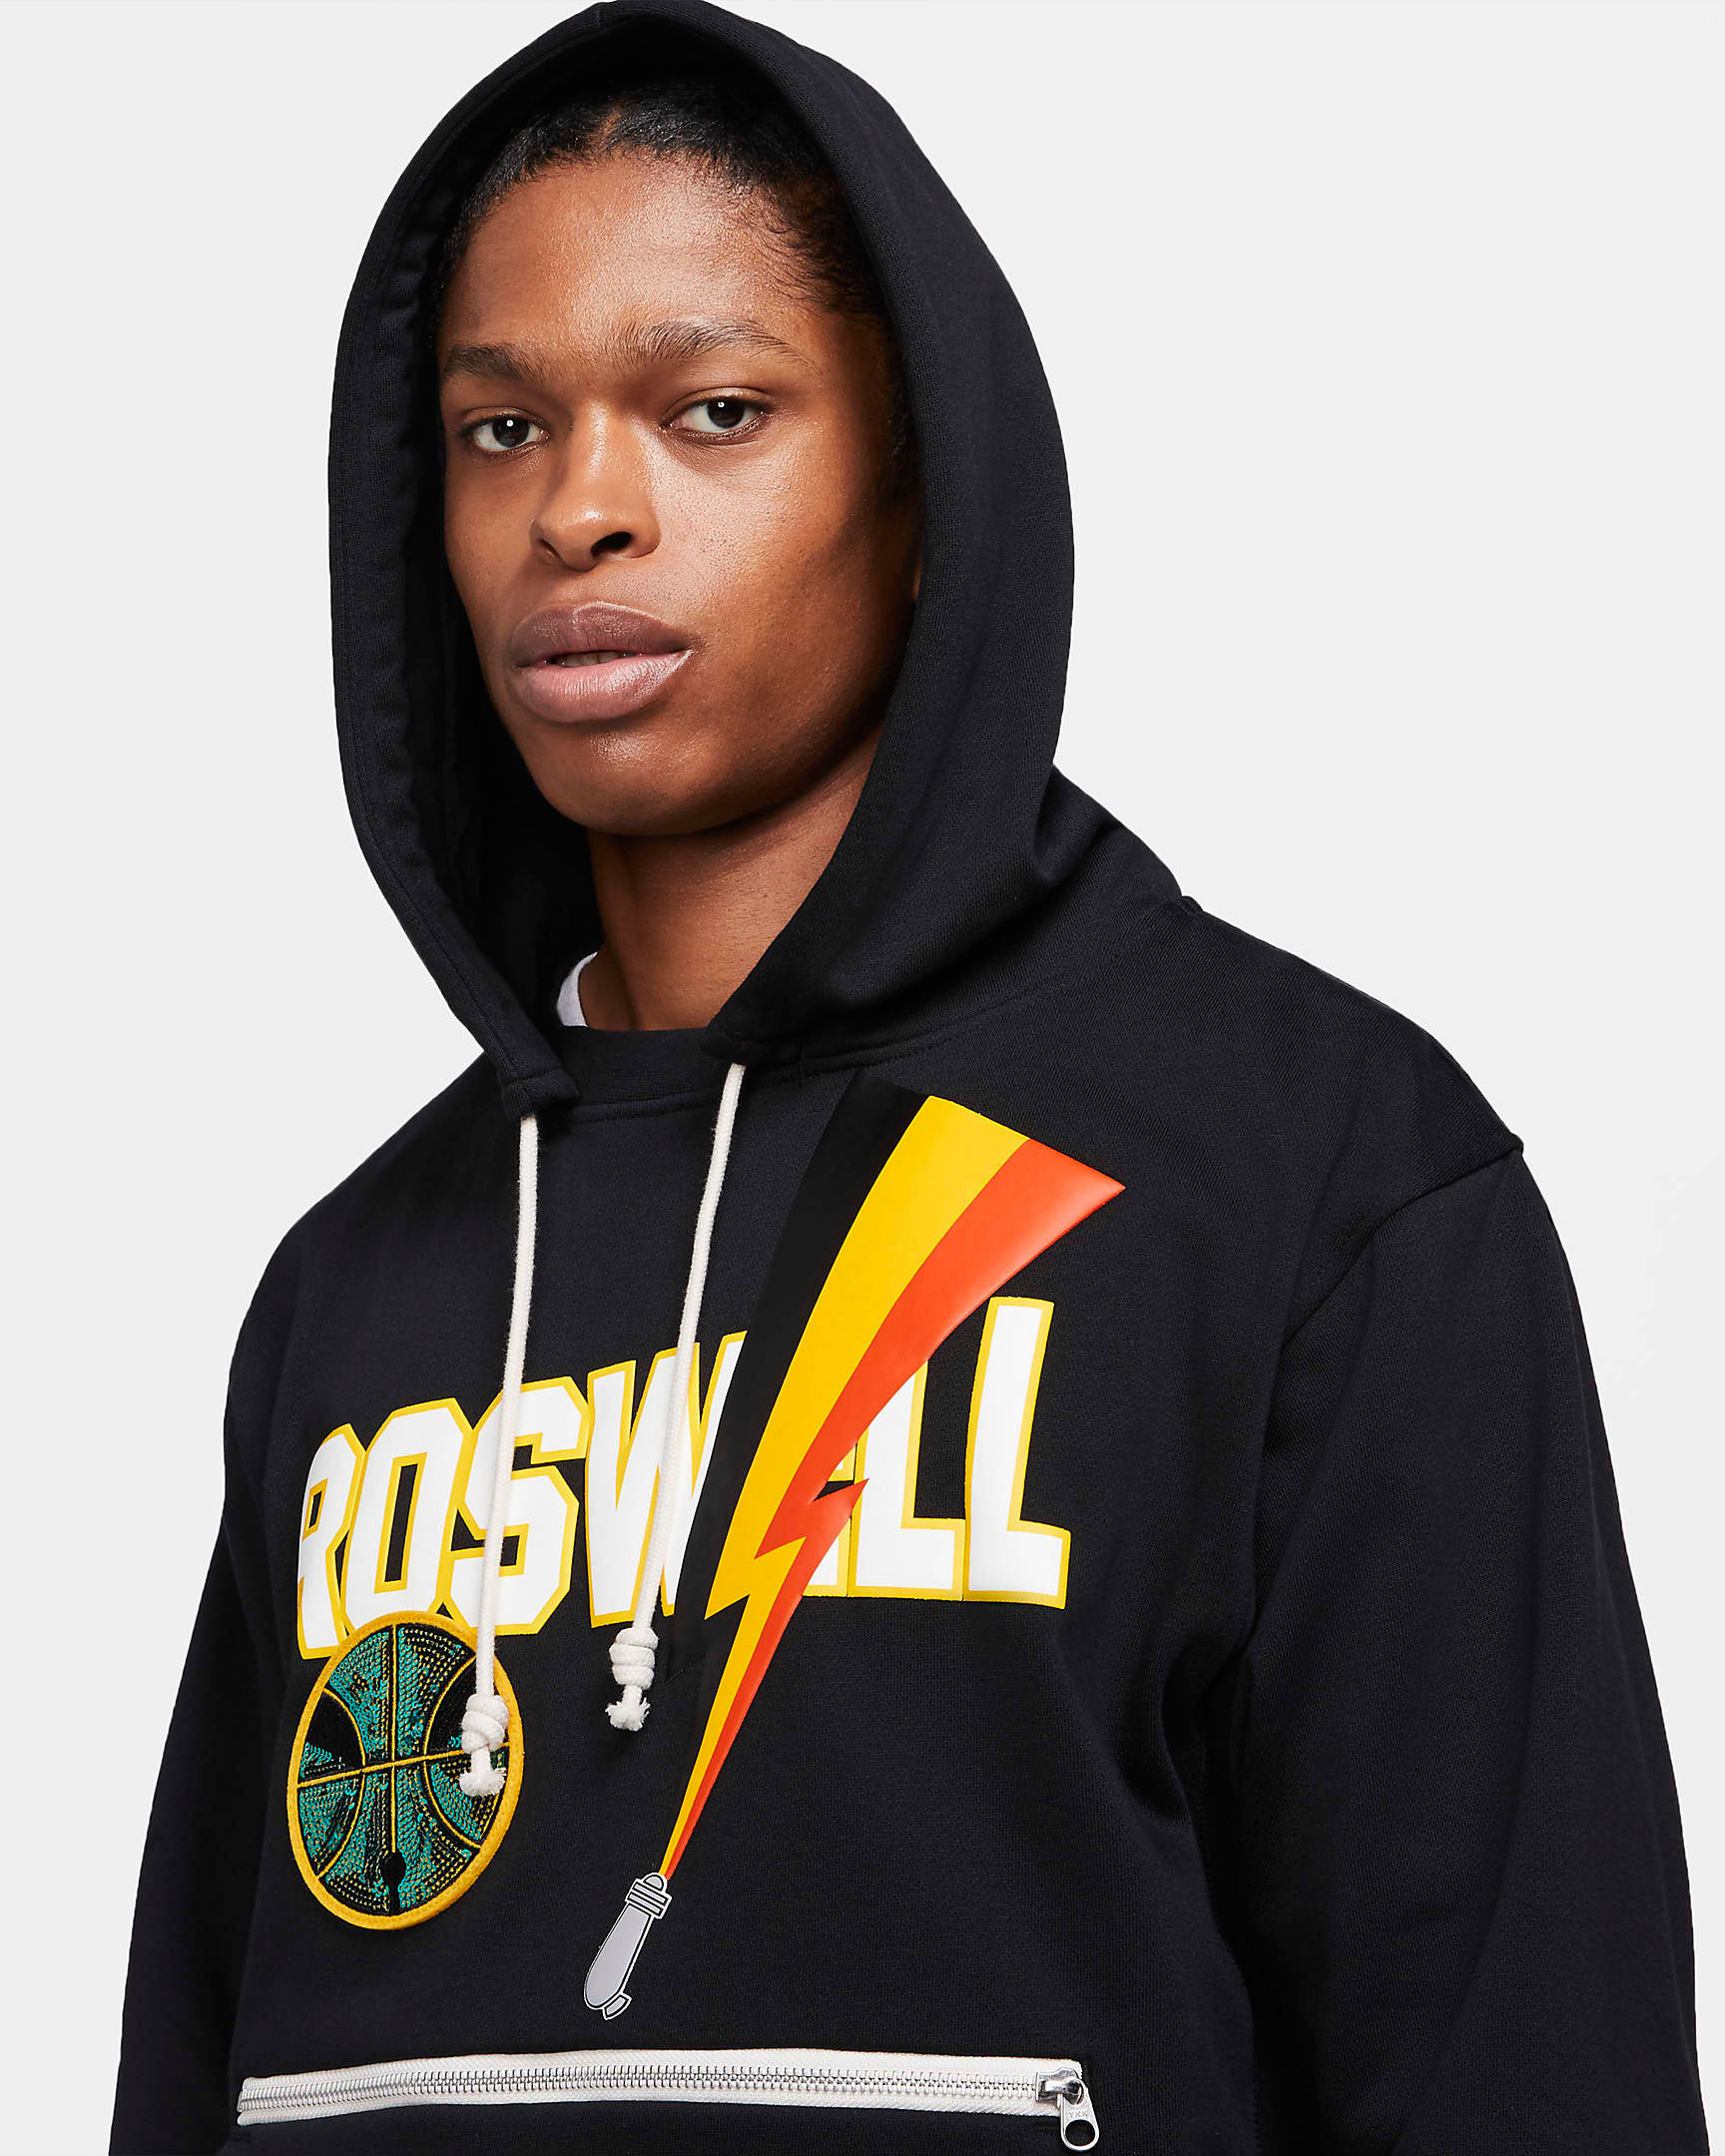 roswell rayguns hoodie